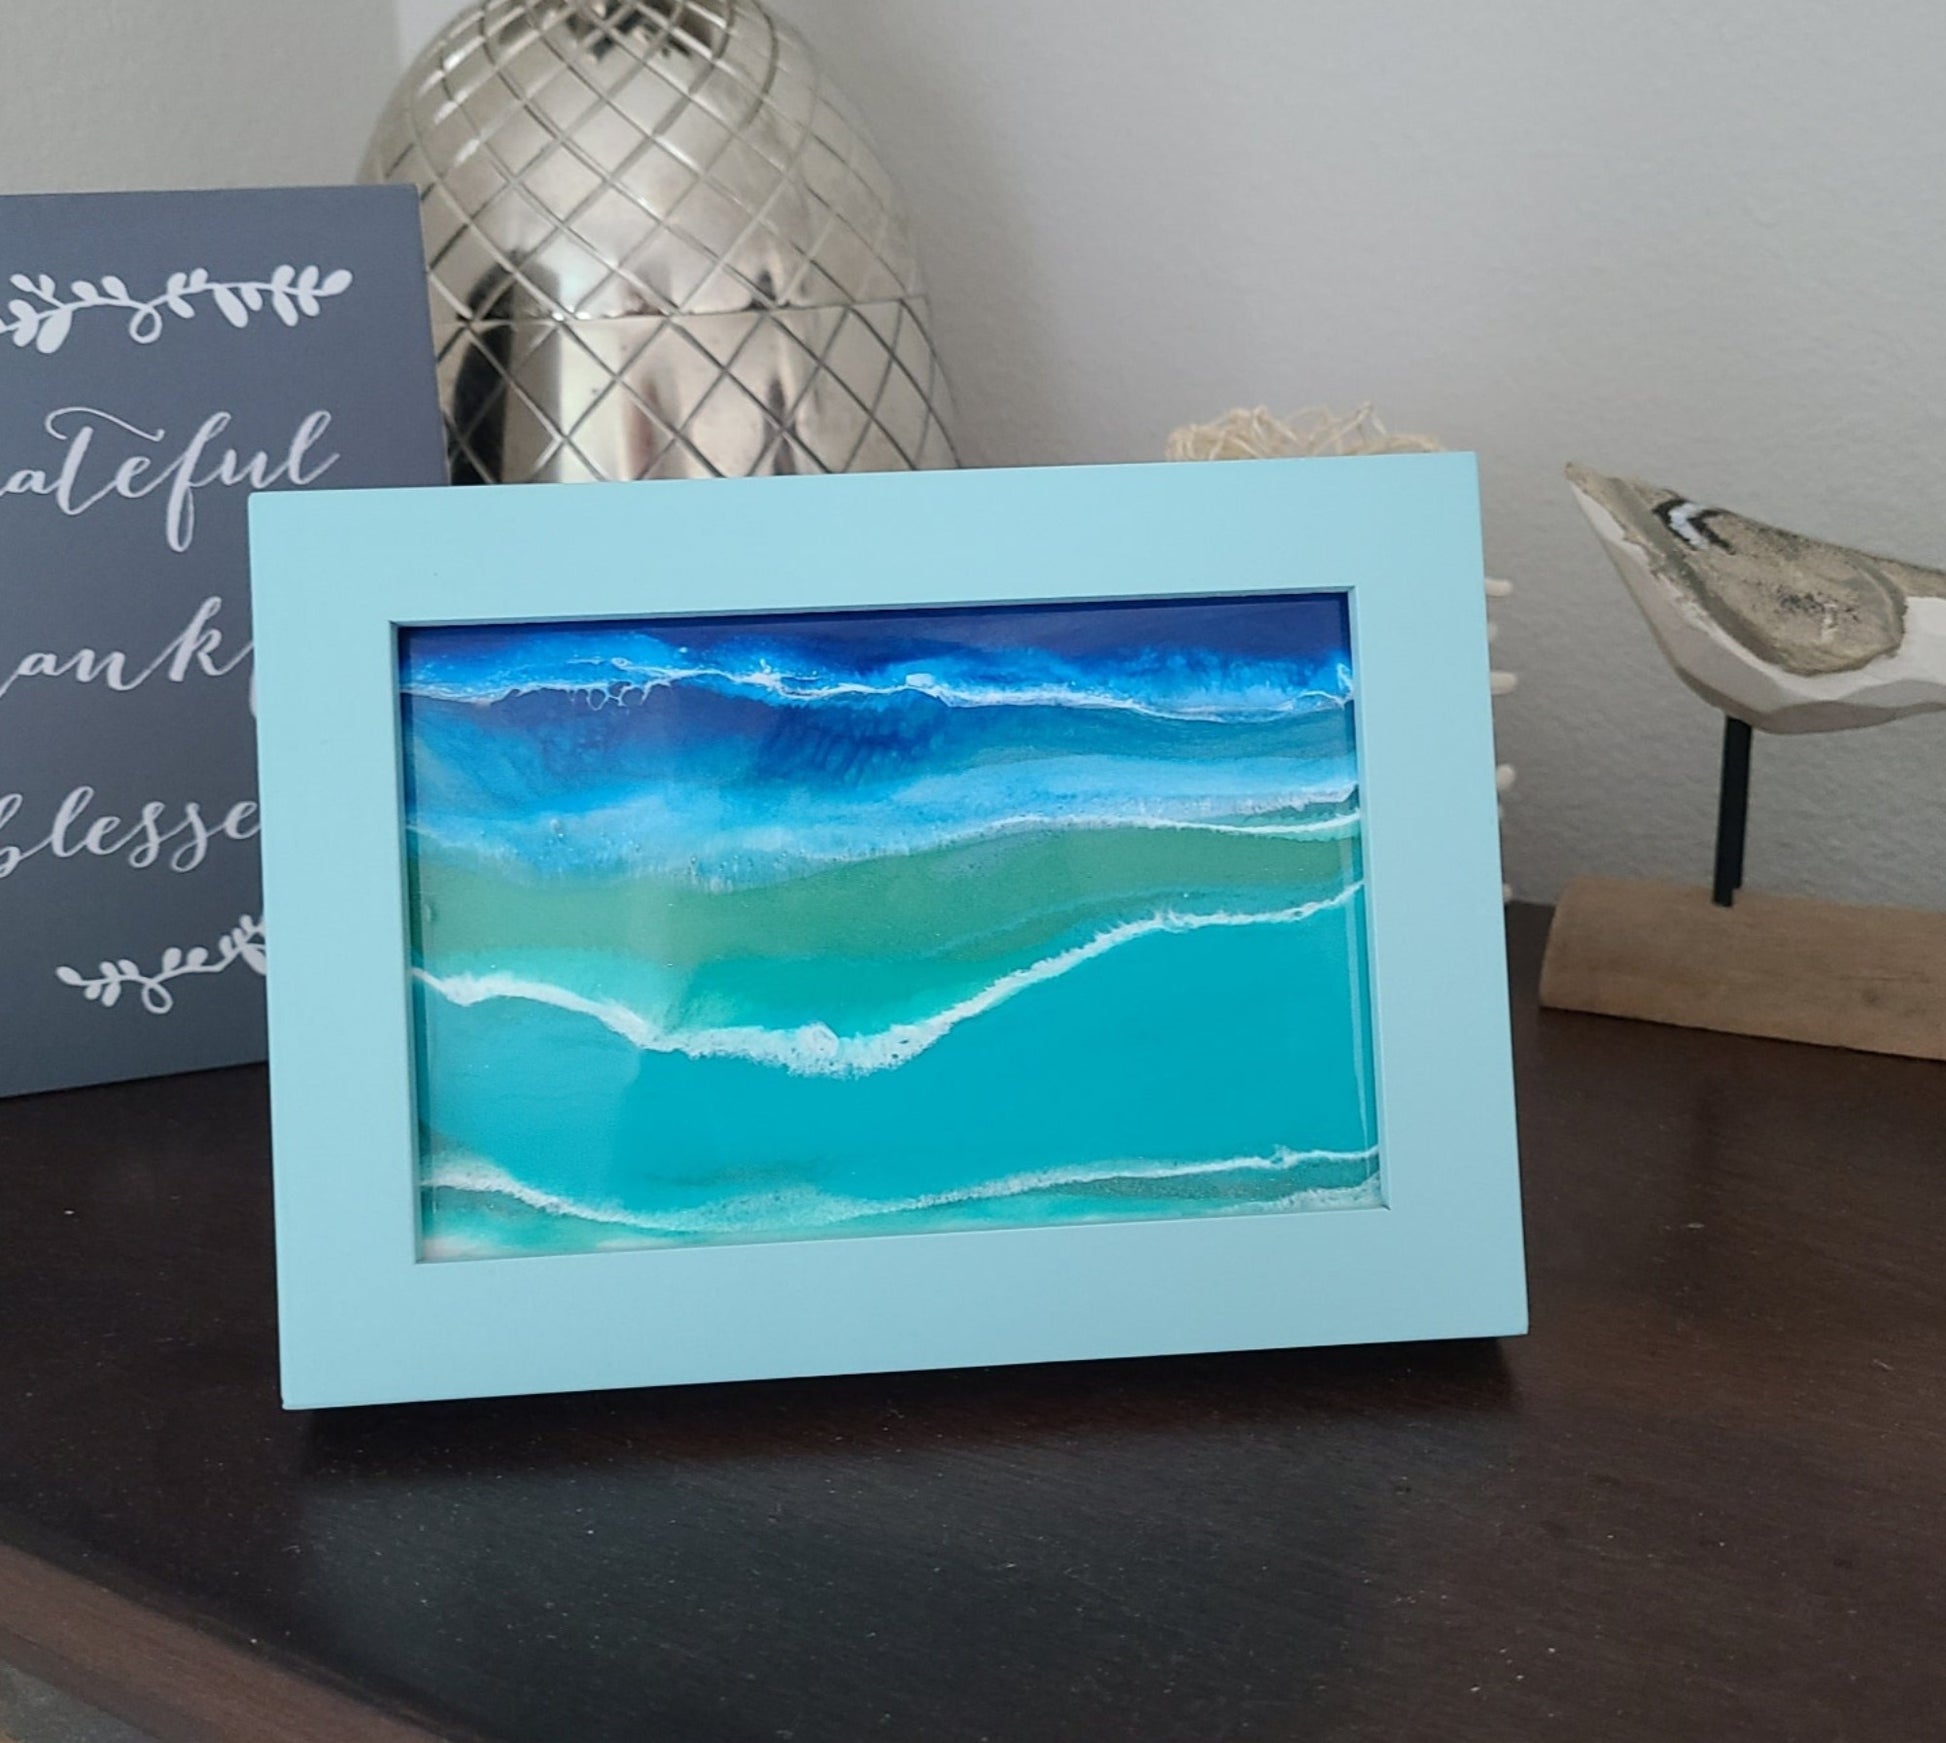 Need a cute picture in a small spot? I had so much fun making these ocean scenes in frames. This one is in a sea foam blue/green wood frame.  When you touch and feel the "picture", it feels like glass.  I took the glass from the frame and resined an ocean scene on it.    The frame can stand alone or be hung.  Approximate size:  7.25 x 5.25 inches overall; inside dimensions are approximately 5.5 x 3.75 inches.